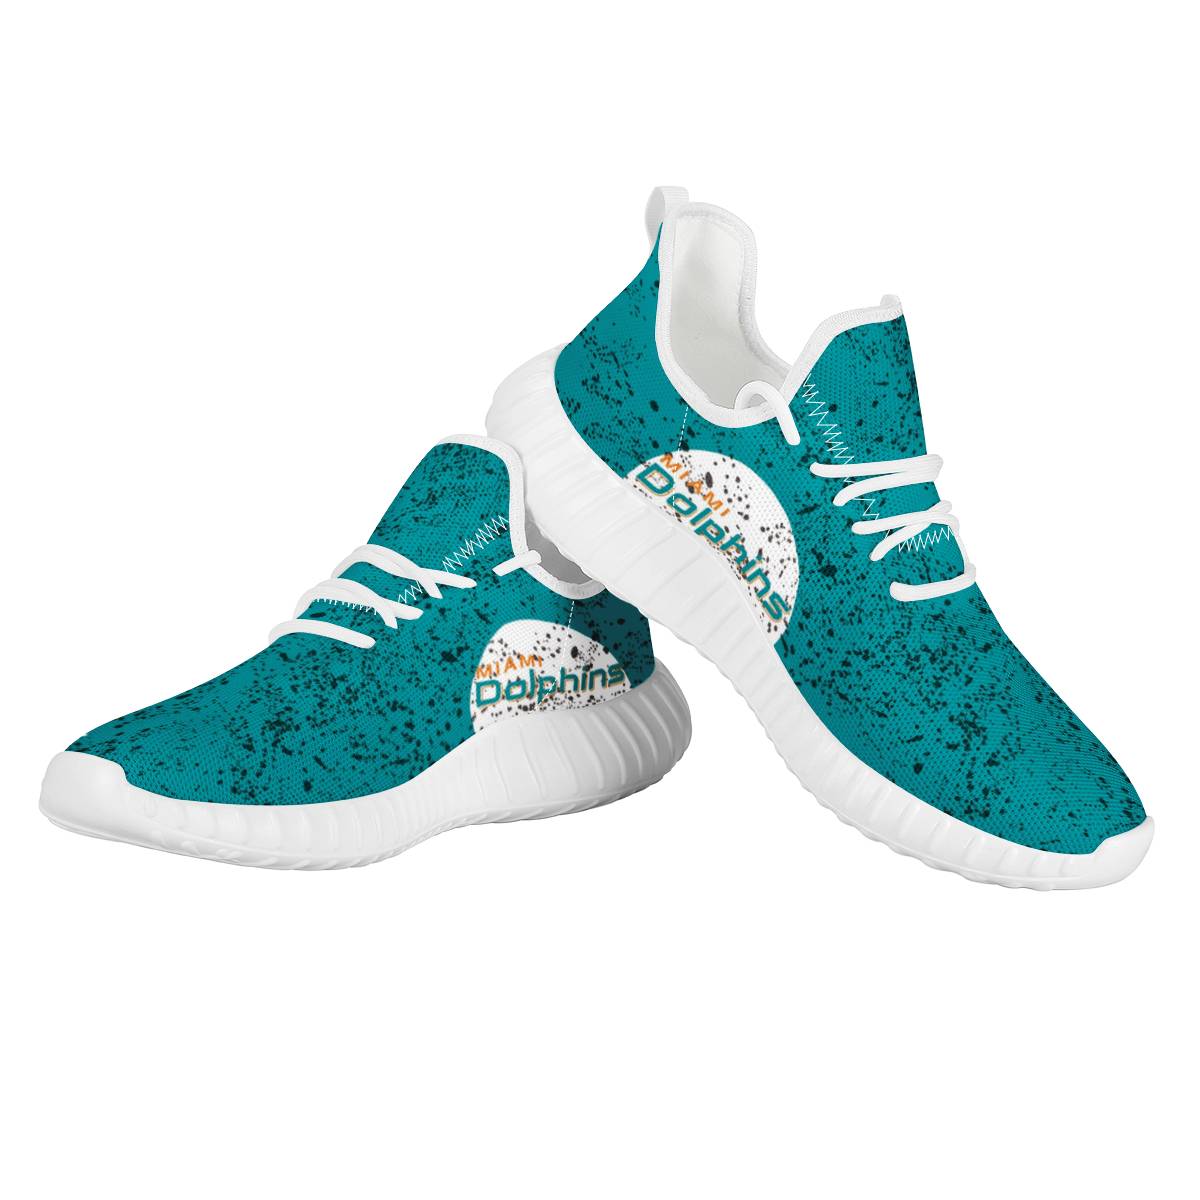 Women's Miami Dolphins Mesh Knit Sneakers/Shoes 016